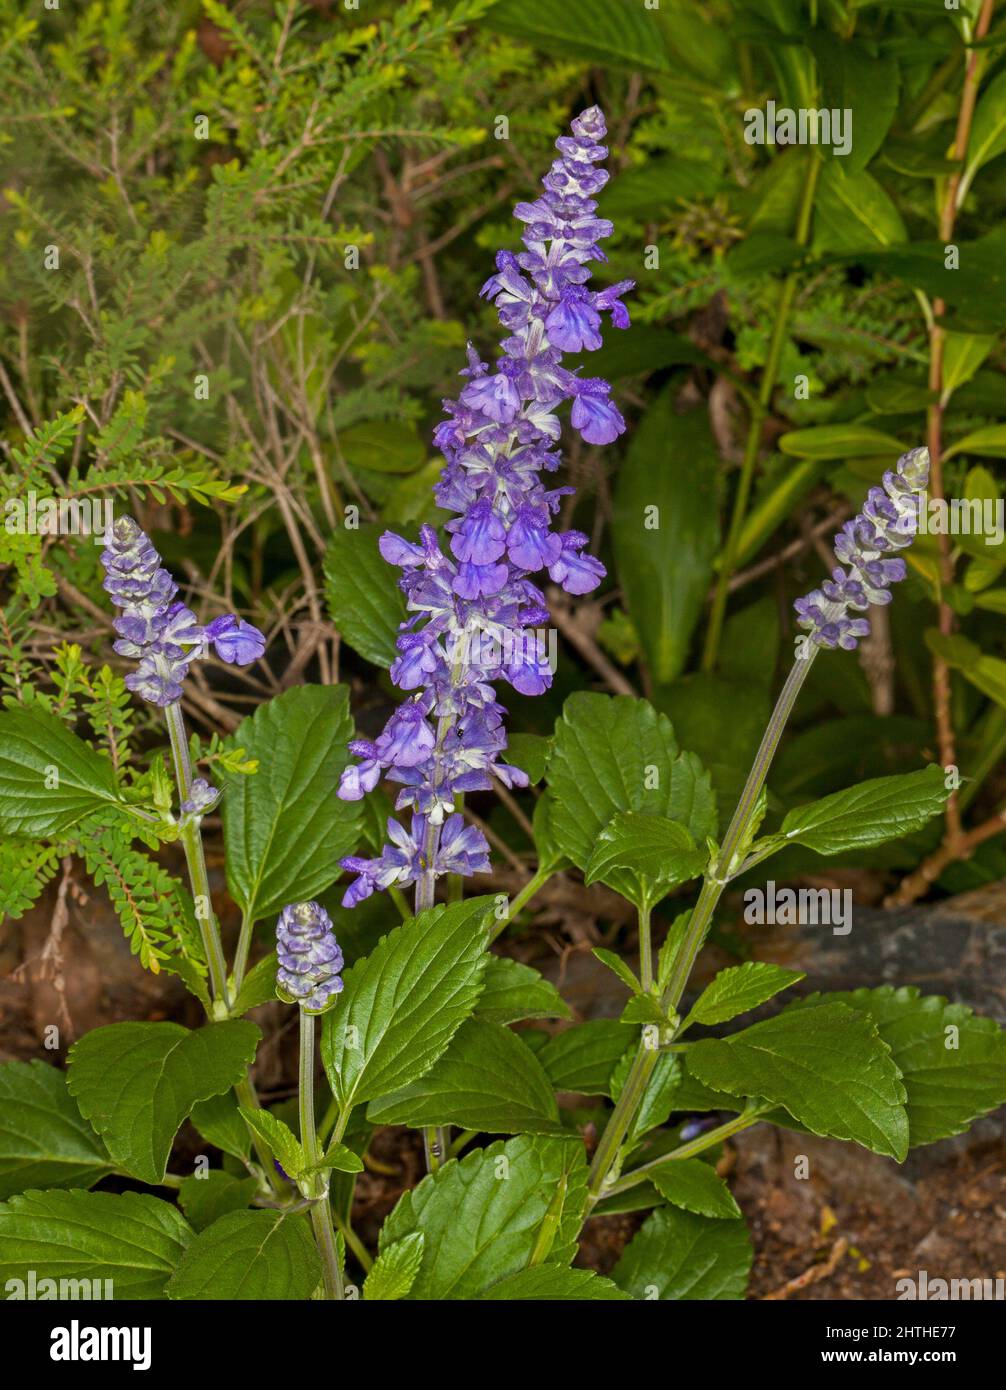 Tall spikes of vivid blue flowers of sage Salvia longispicata x farinacea Mystic Spires, garden perennial, against background of emerald green foliage Stock Photo